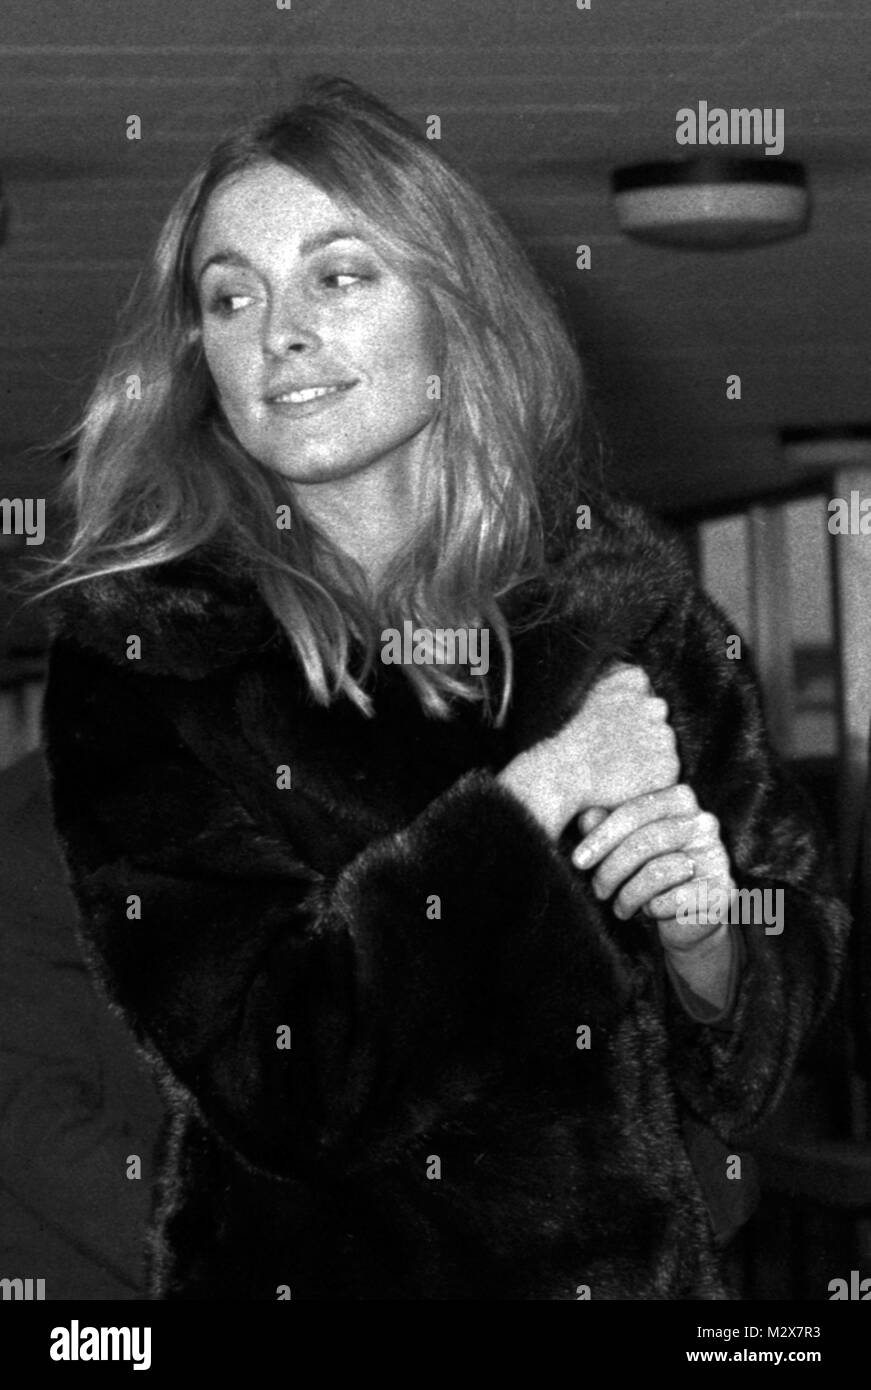 Actress Sharon Tate at Heathrow Airport, London, after flying in from Paris after a honeymoon with Roman Polanski (not pictured). Stock Photo